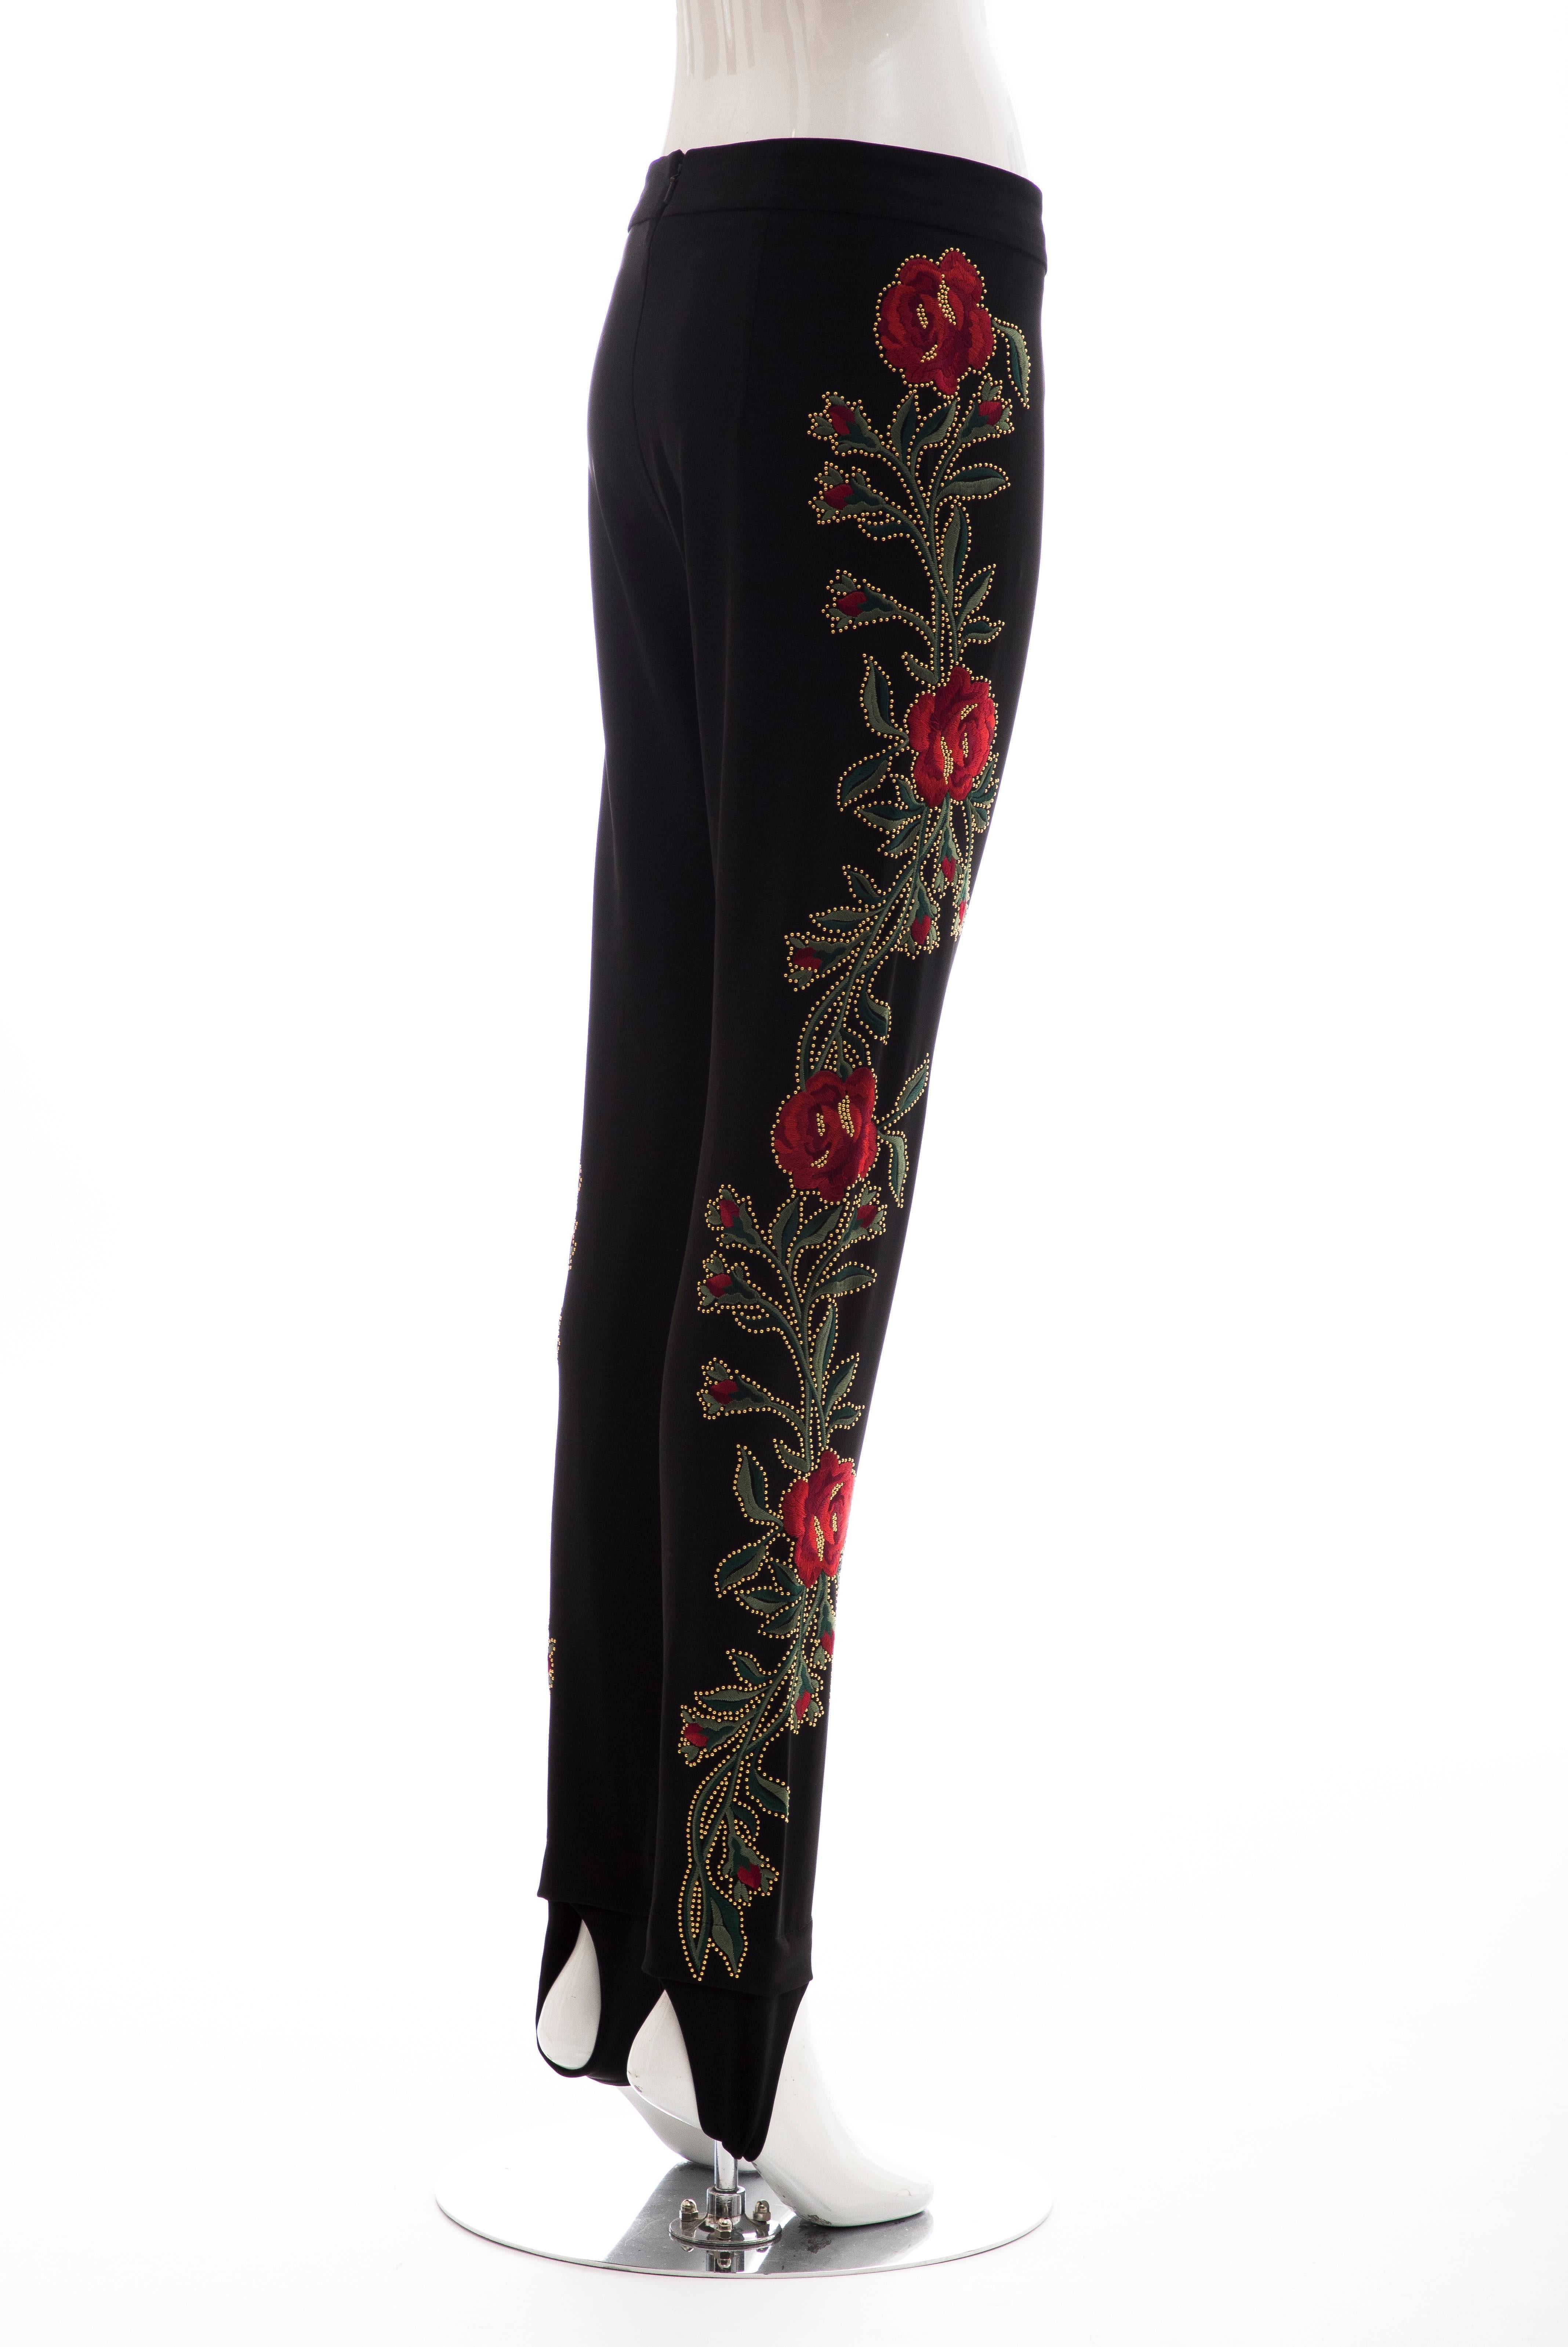 Moschino Runway Black Floral Embroidered & Gold Studded Pants, Fall 2013 For Sale 3